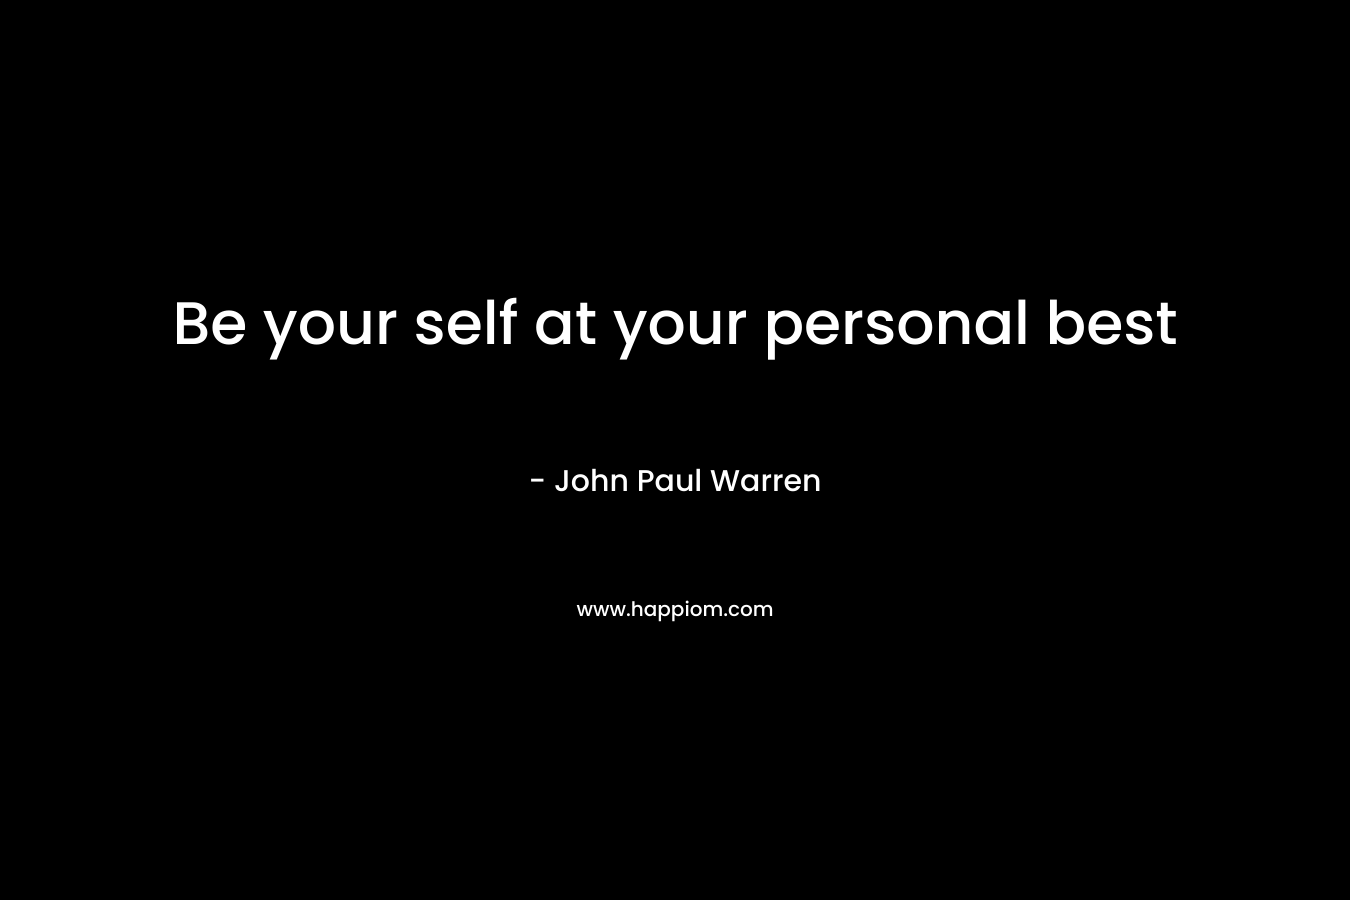 Be your self at your personal best